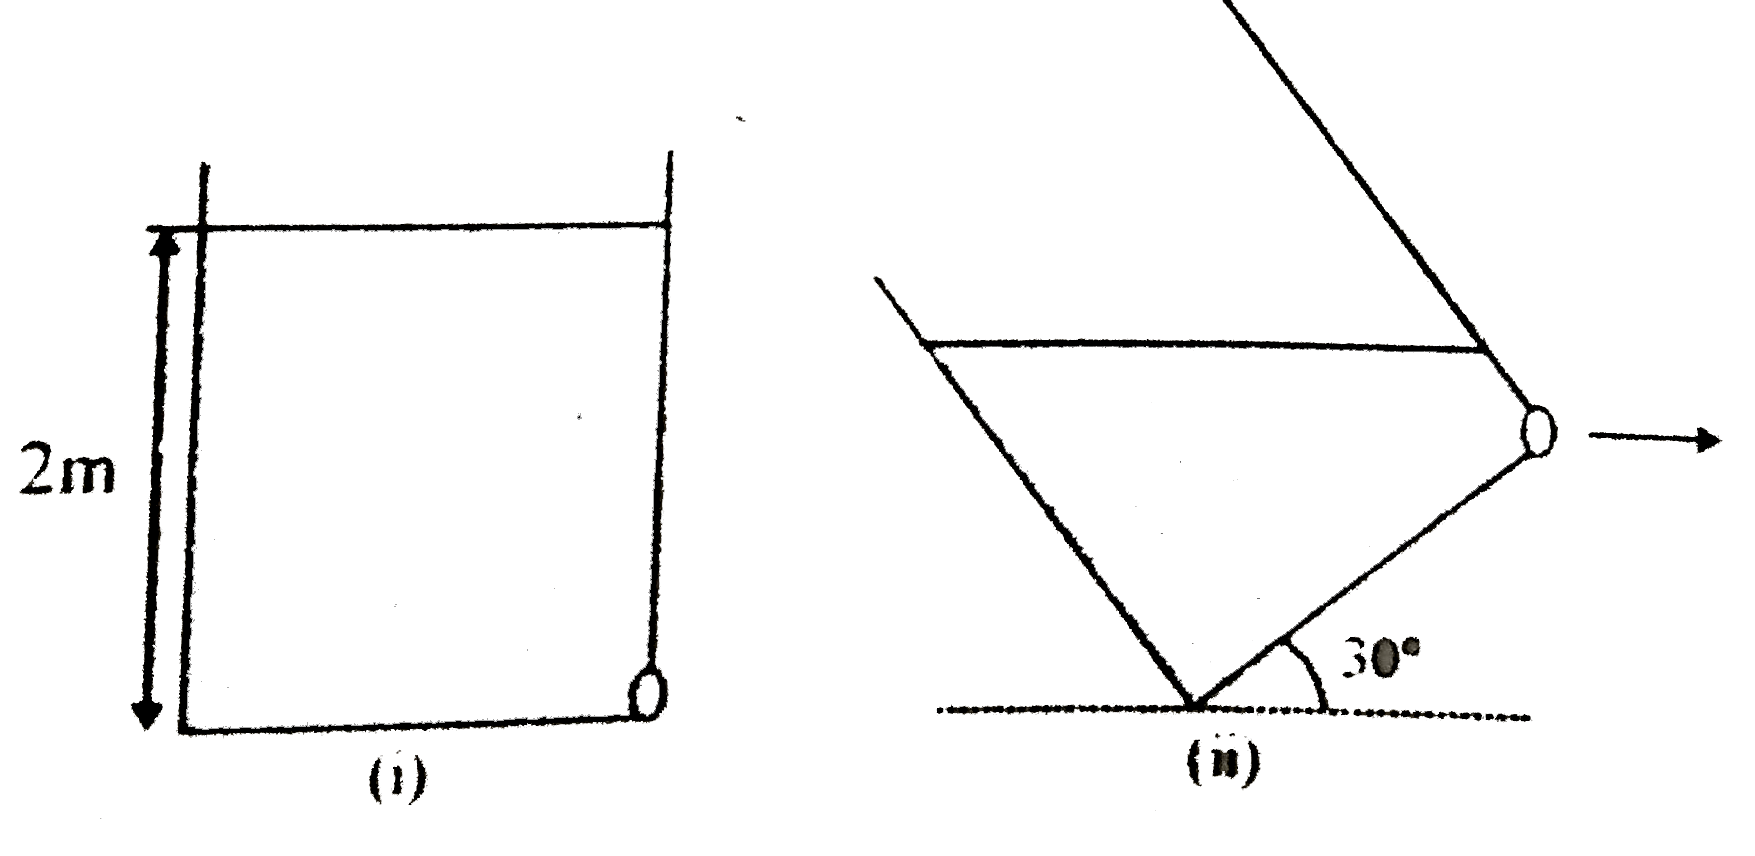 Velocity of efflux in torricelli's theorem is given by v=sqrt(2gh), here h is the height of hole from the top surface, after that, motion of liquid can be treated as projectile motion. Liquid is filled in a vessel of square base (2mxx2m) upto a height of 2m as shown in figure (i). in figure (ii) the vessel is tilted from horizontal at 30^(@) what is the velocity of efflux in this case ? Liquid does not spills out?